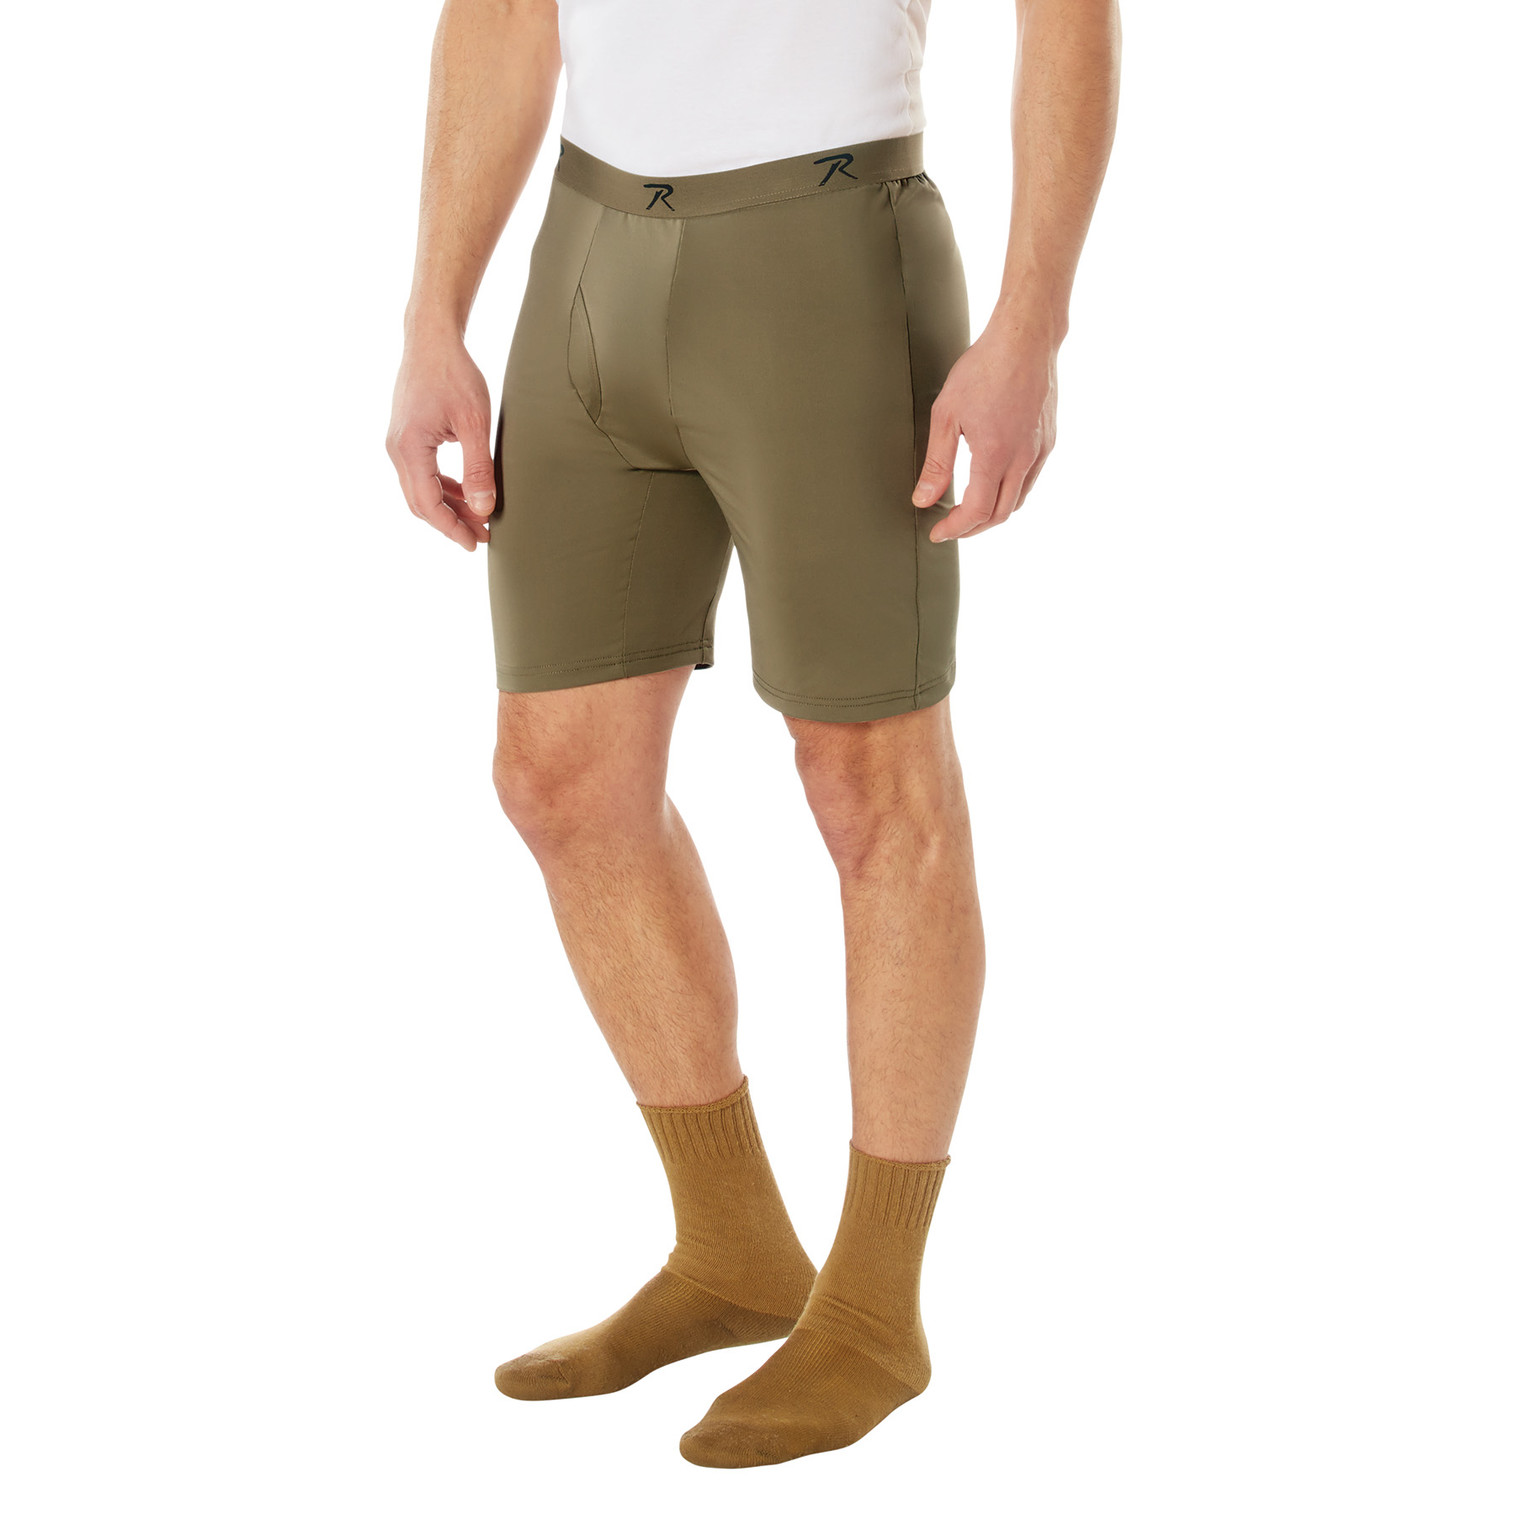 Rothco Long Length Moisture Wicking Performance Boxer Shorts - AR 670-1 Coyote Brown